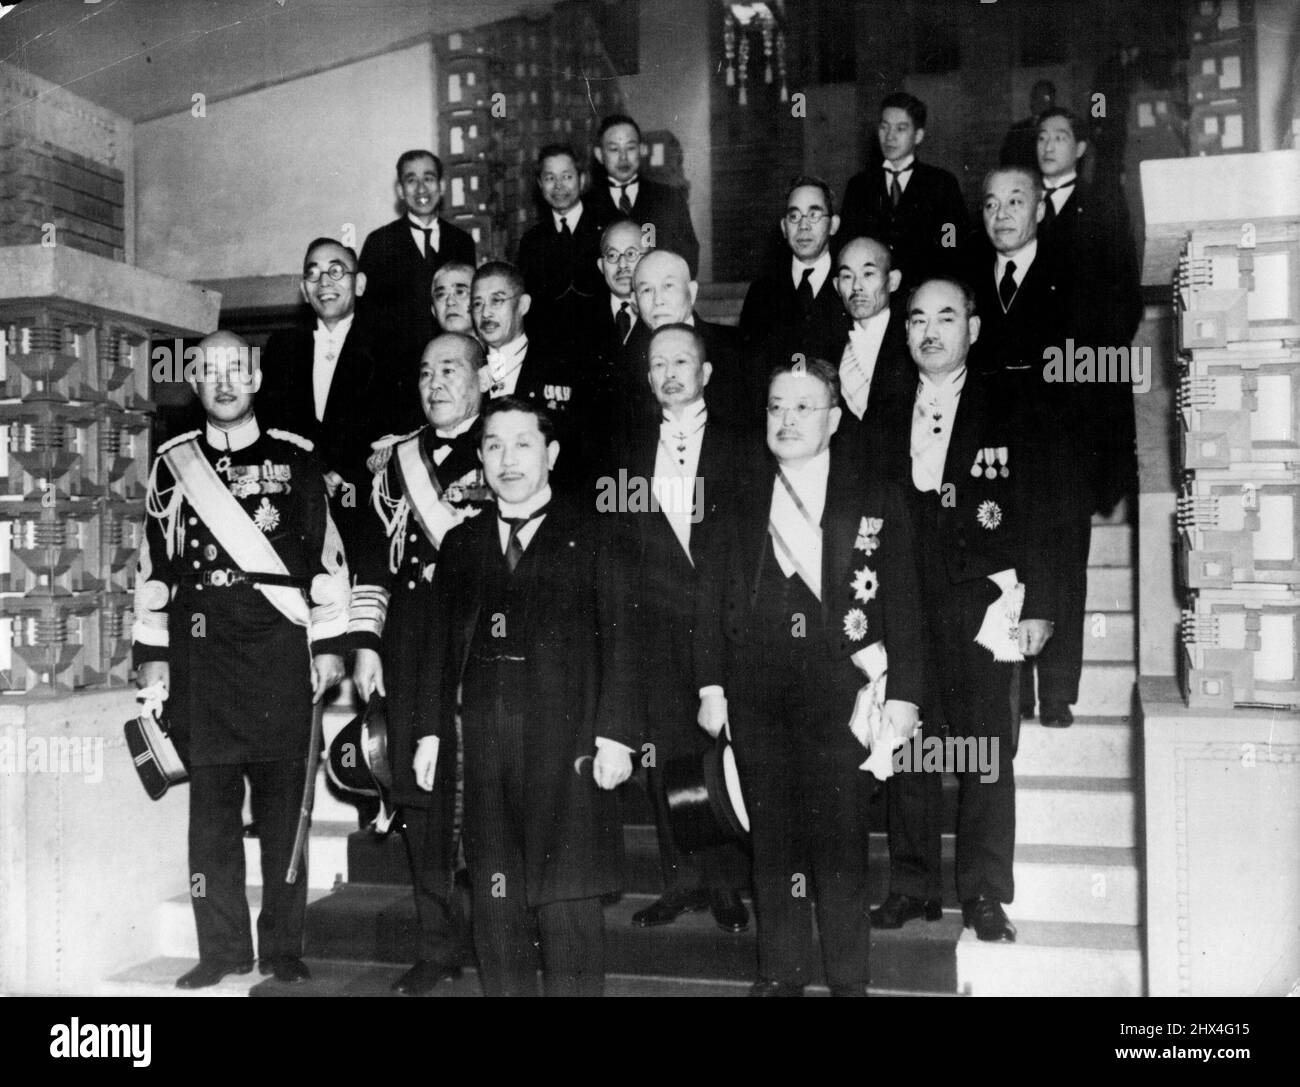 The New Nippon Cabinet Hirota - All State Ministers of the Hirota Cabinett. First row: War Minister Count General Hisakazu Terauchi; Premier and Foreign Minister Koki Hirota;Industrial and Commercial Minister Takukichi Kawasaki; Second row: Navy Minister Admiral Osami Nagano; Finance Minister Yeiichi Baba; Justice Minister Dr.Raisaburo Hayashi. Third row: Overseas Minister Hidejiro Nagata; Communications Minister Keikichi Tanomogi; Agricultural and Forest Minister Toshio woo.anNoJesia6anio[mmAn Mayeda and Home Minister and Education 16P089000-HINS Minister Keinosuke Ushio. March 30, 1936. Stock Photo